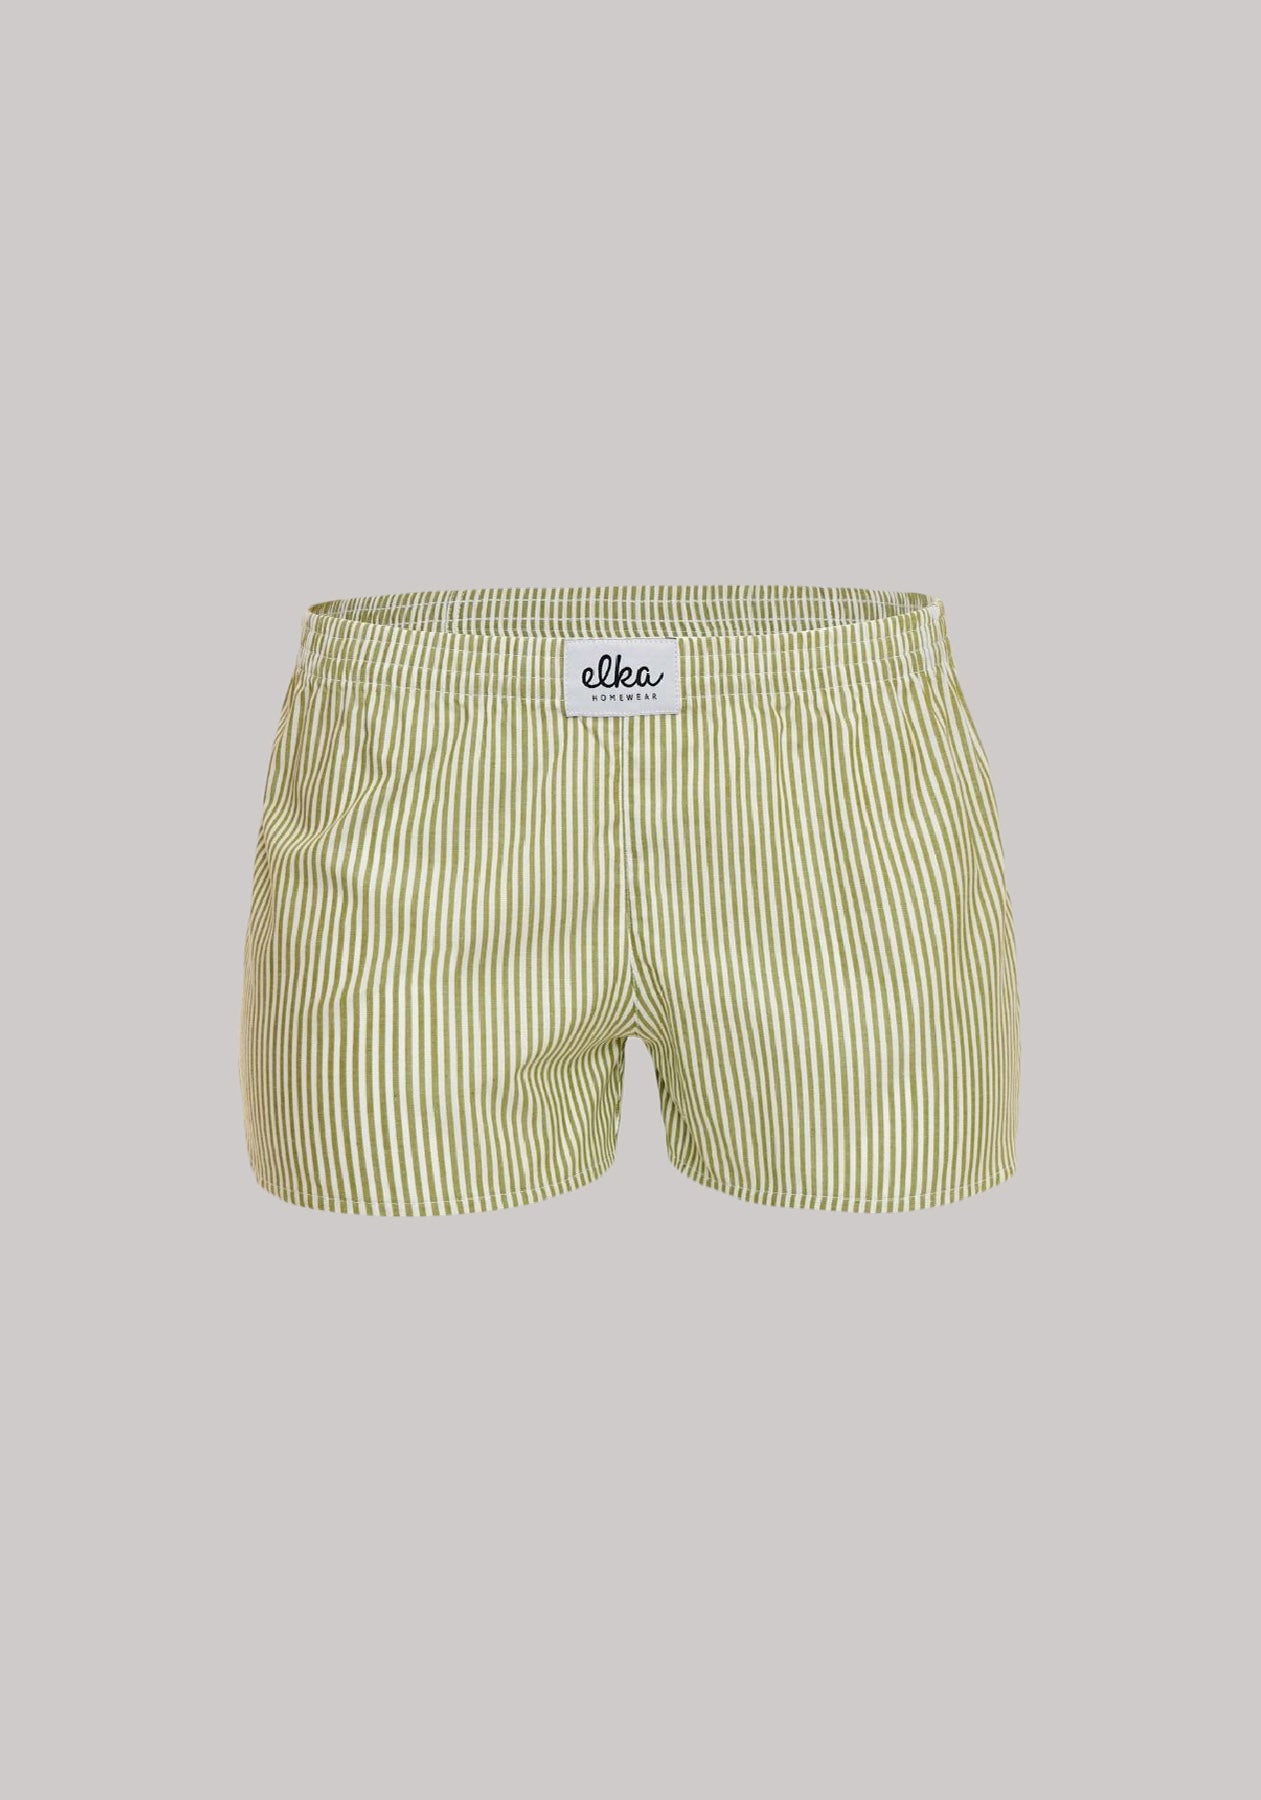 Women's shorts Olive with stripes